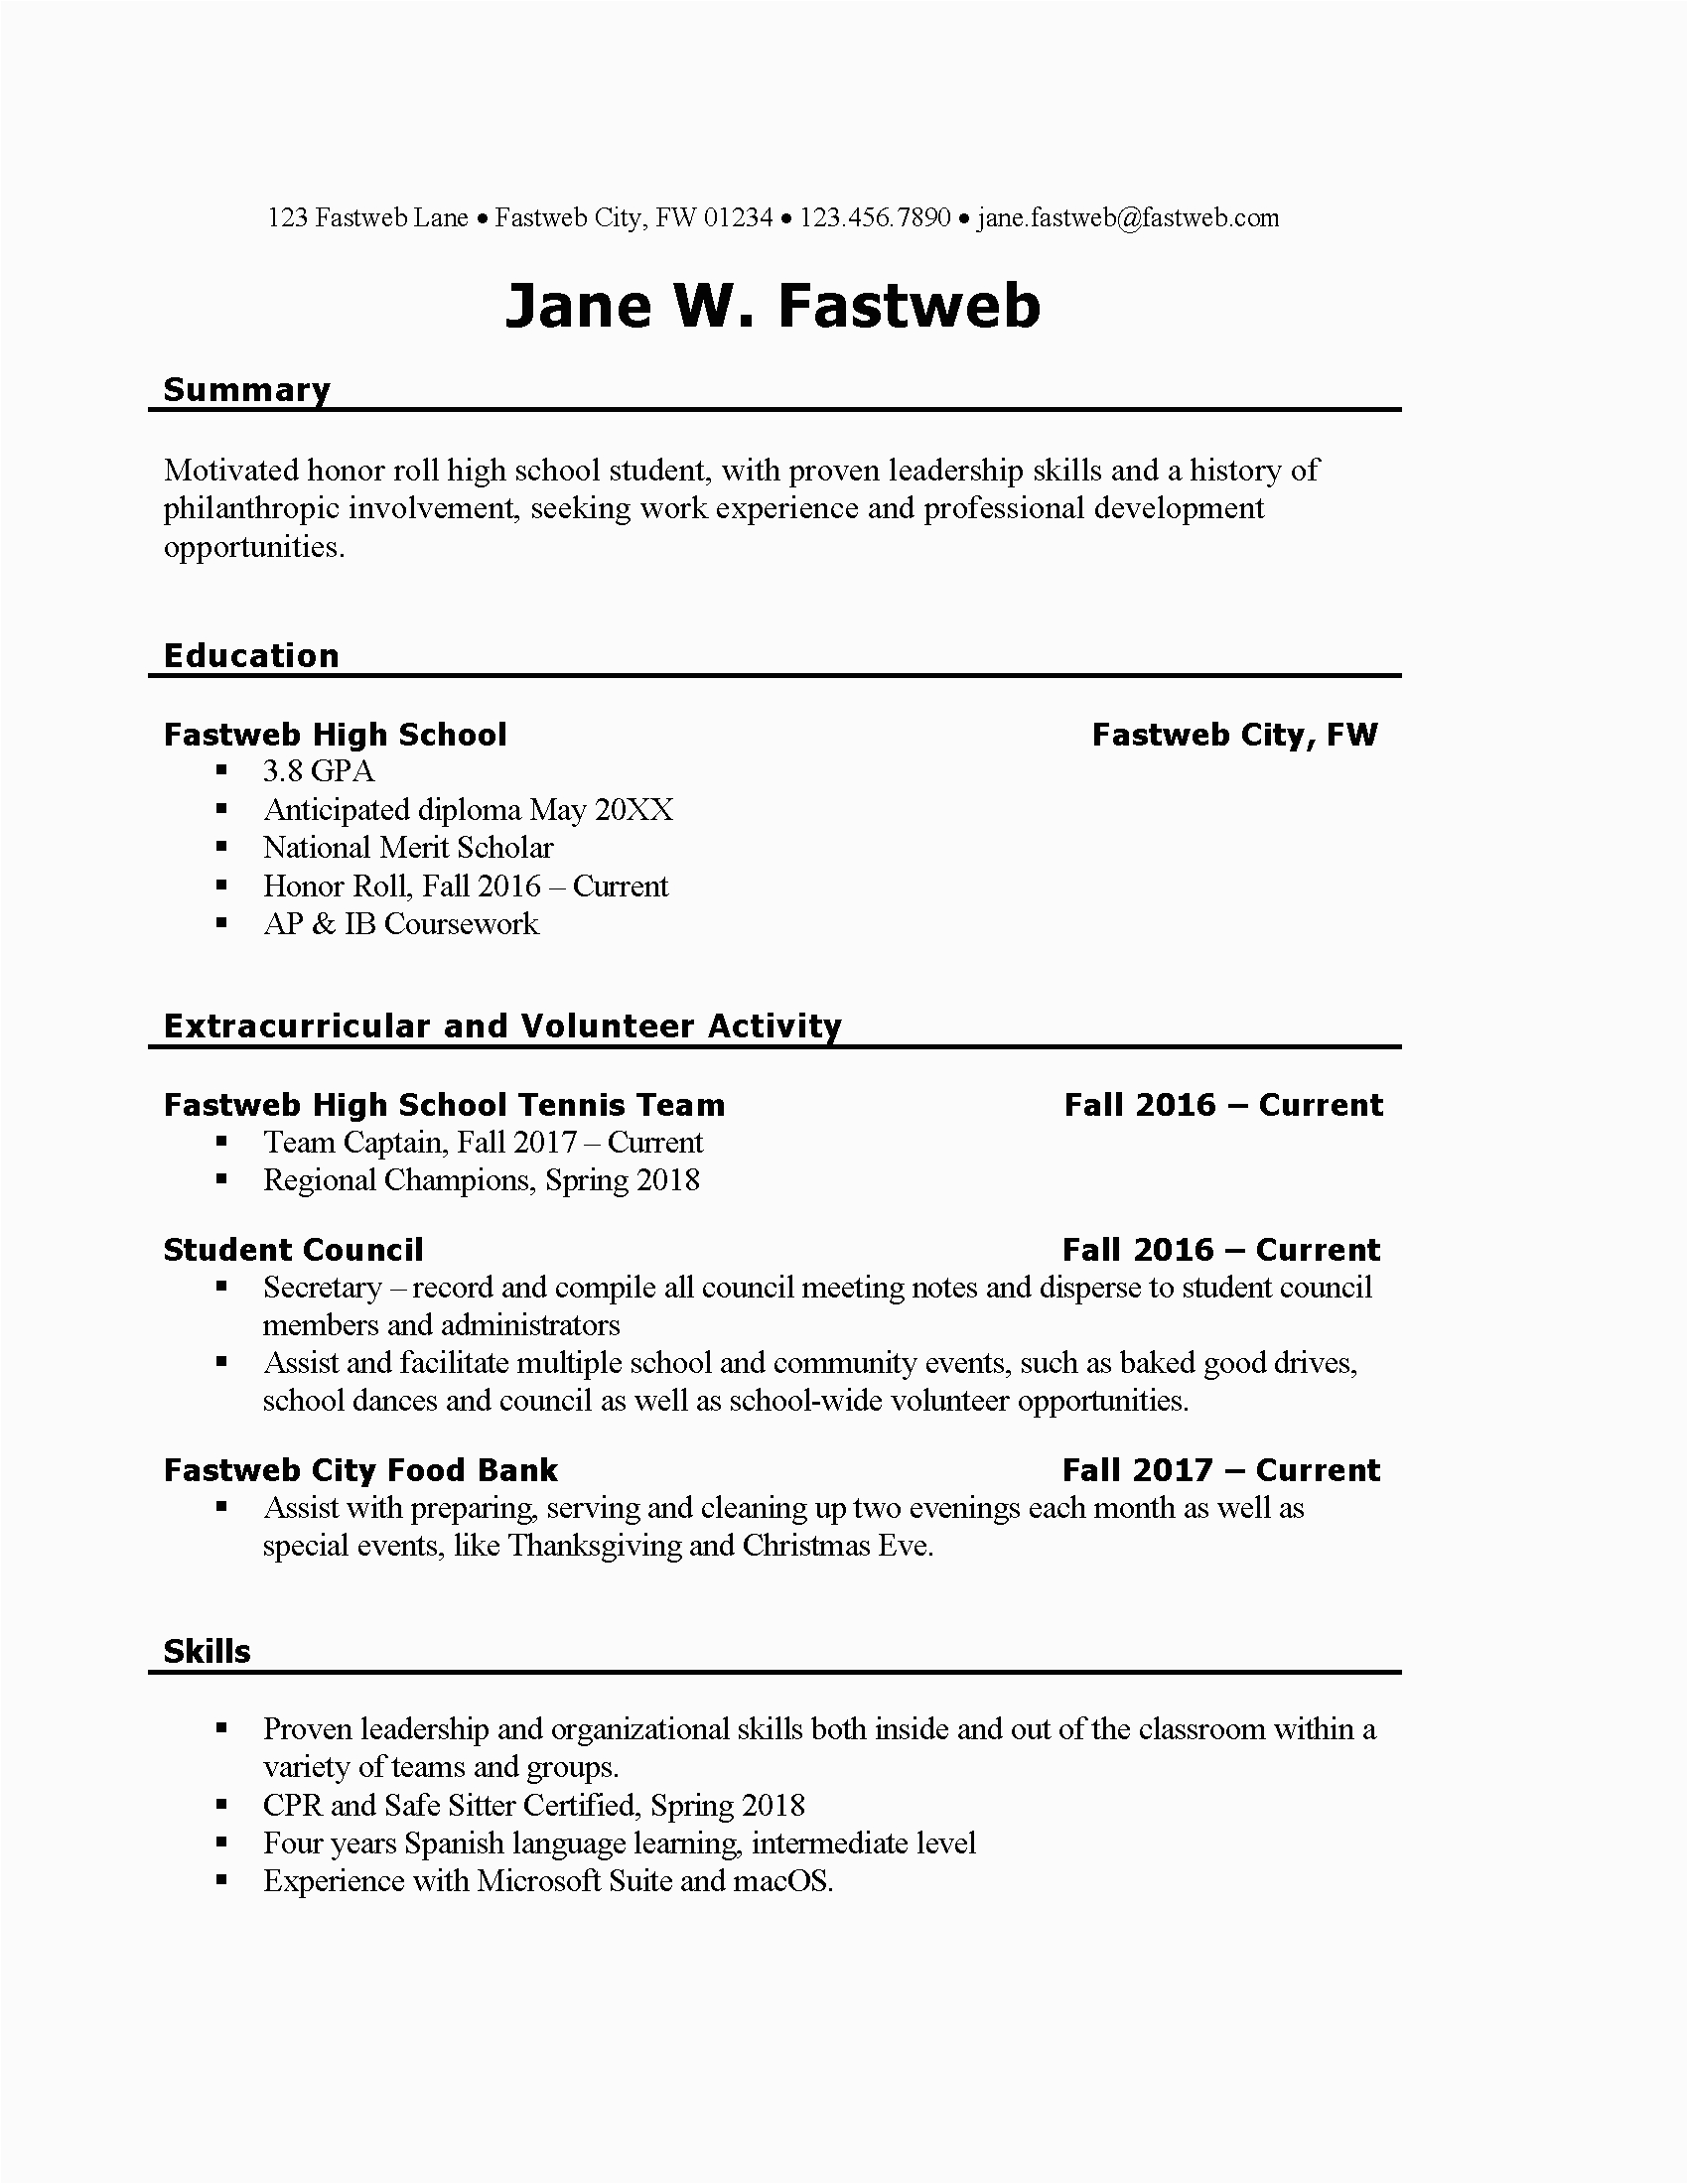 First Time Job Seeker Teenage Resume Sample Resume Examples for Teenager First Job